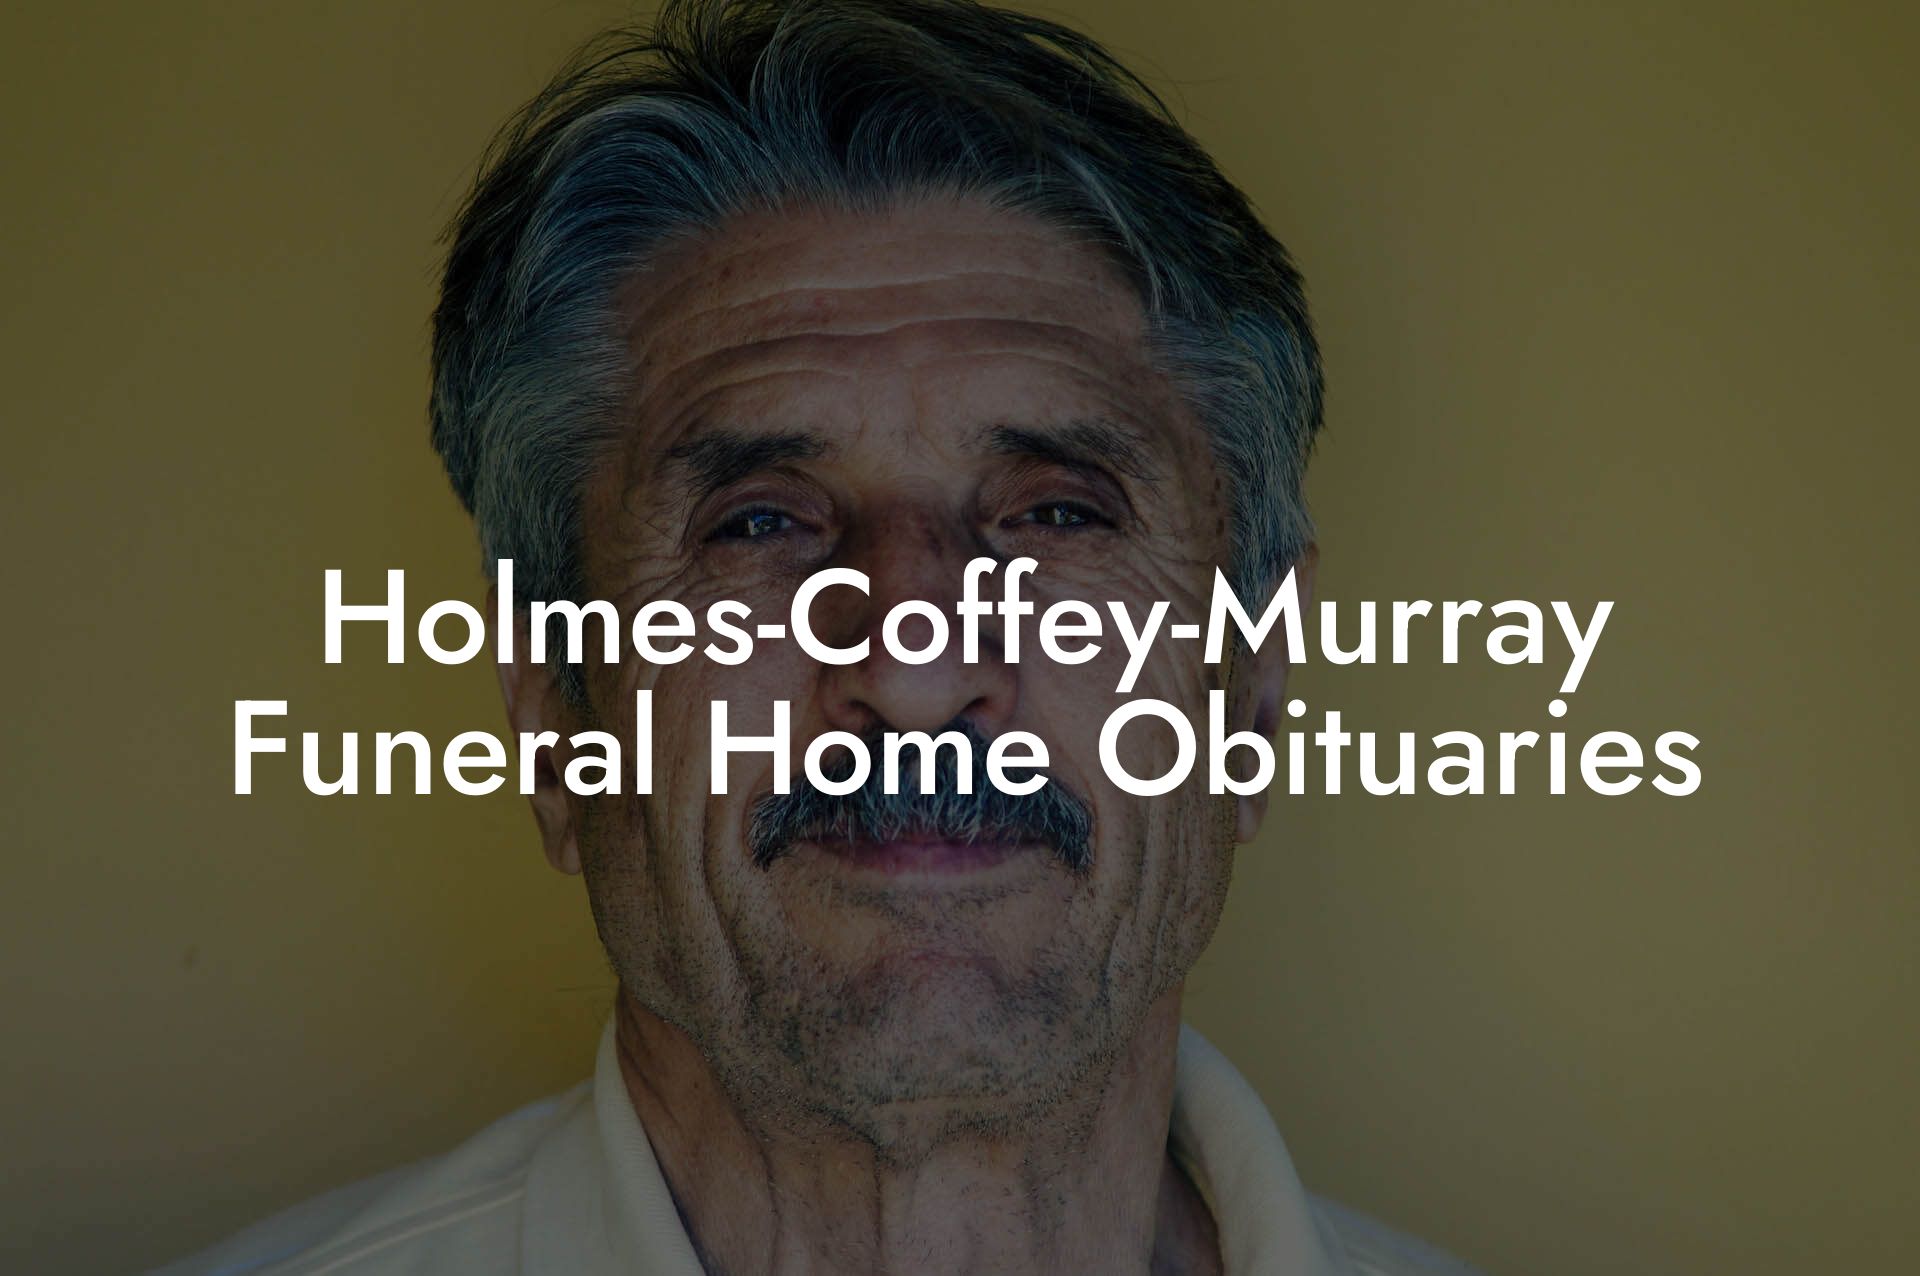 Holmes-Coffey-Murray Funeral Home Obituaries